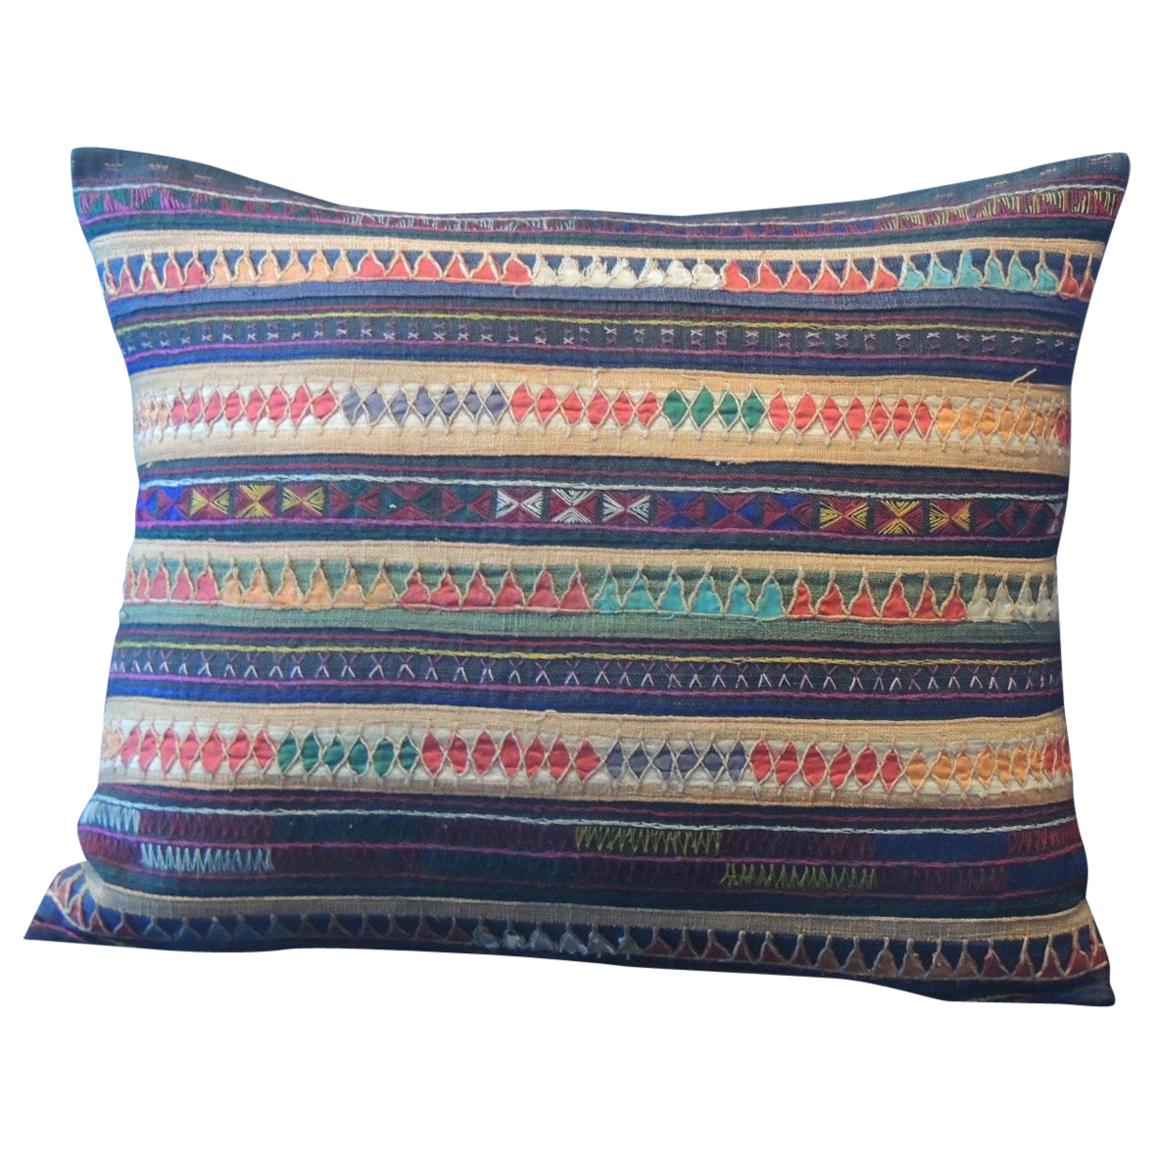 Vintage Colorful Embroidered Indian Silk Decorative Bolster Pillow